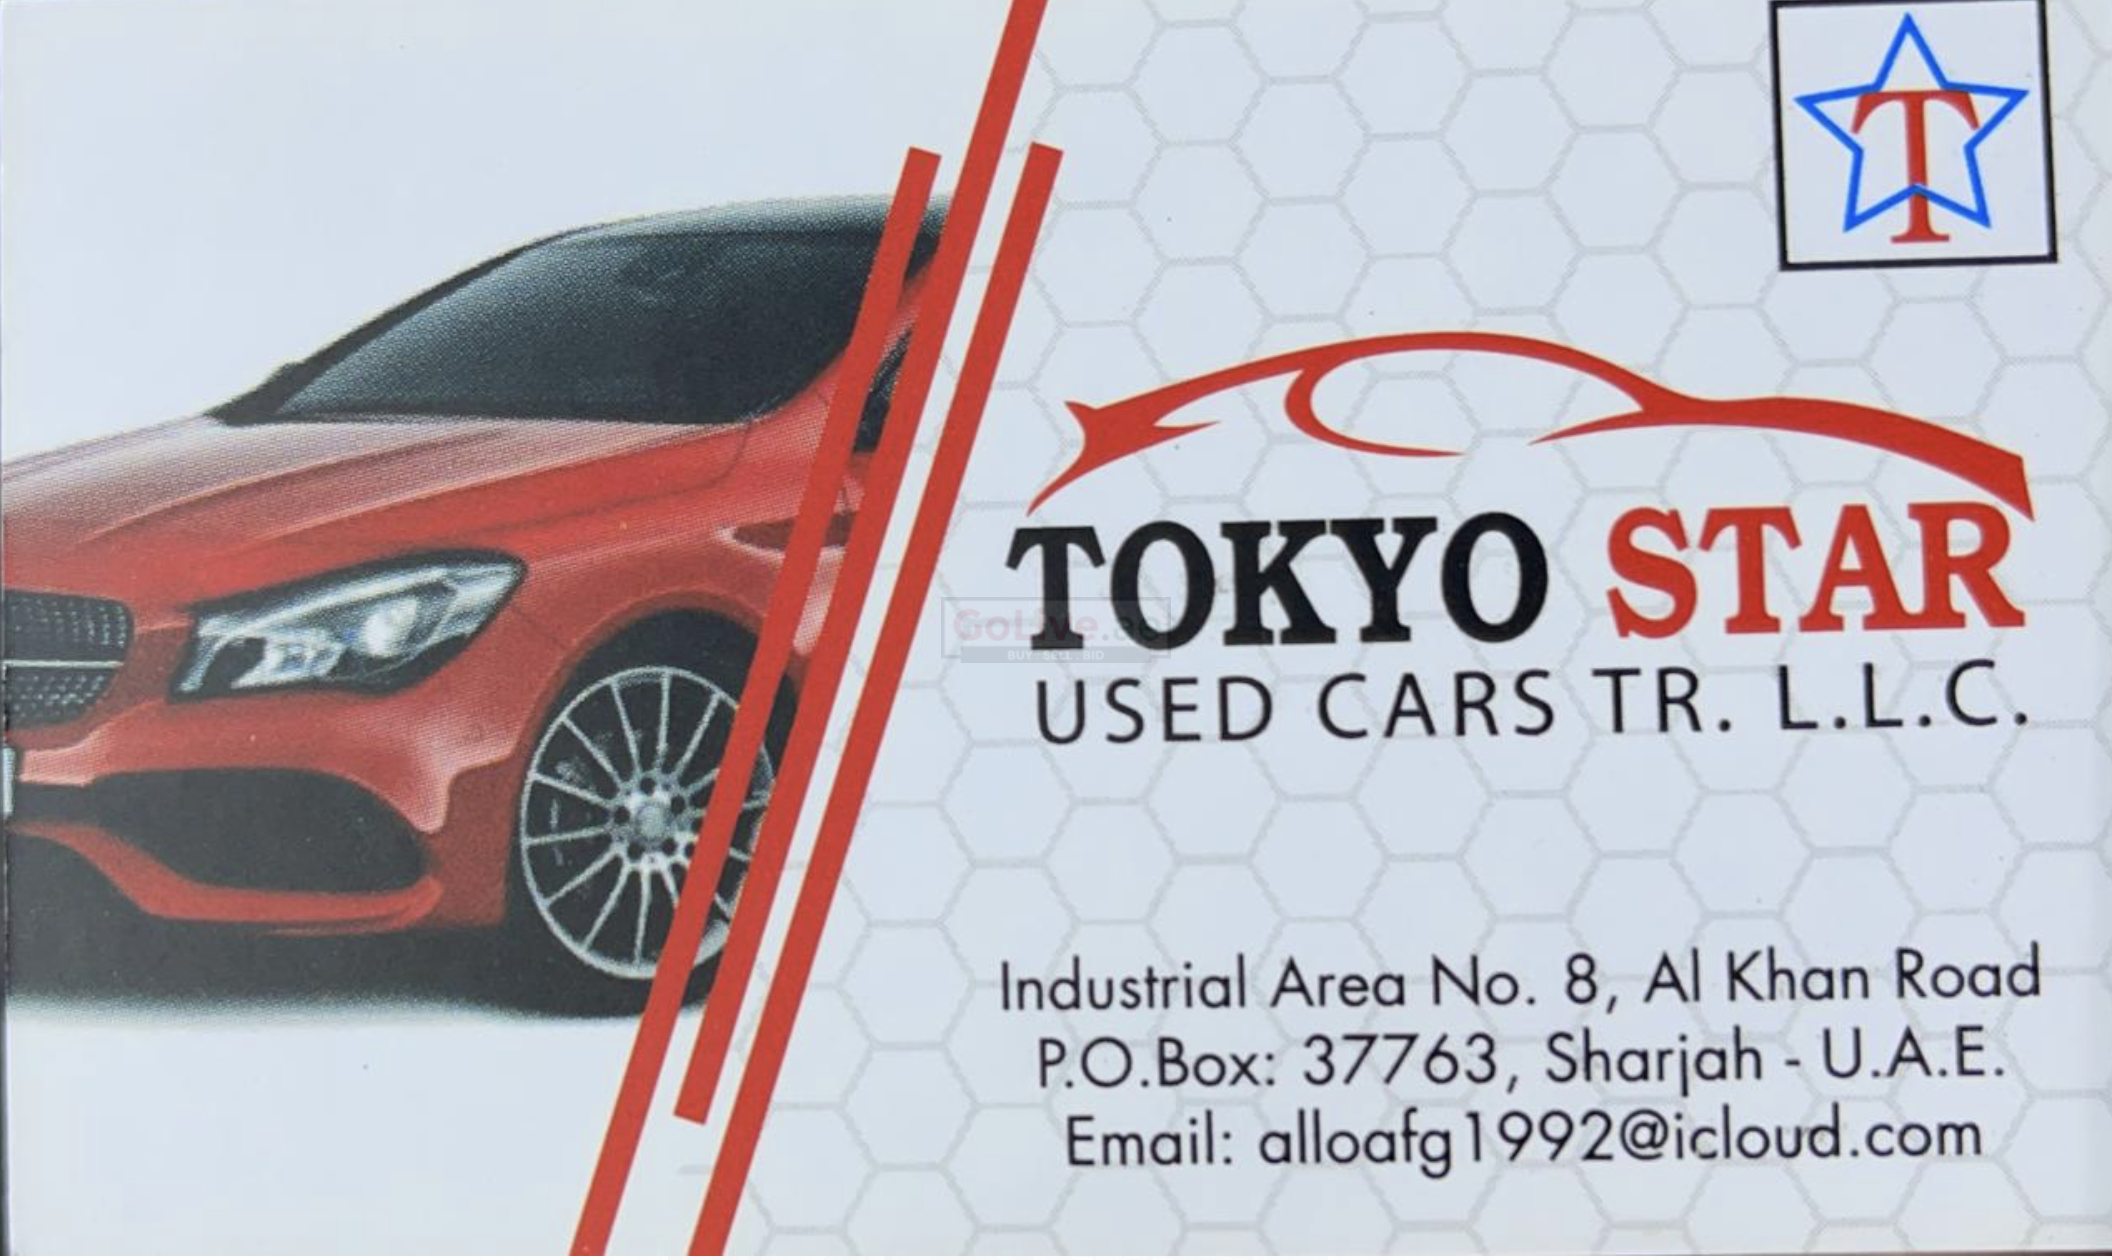 Tokyo Star Used Cars Tr ( Full Range of Mercedes Benz Used Auto Parts )